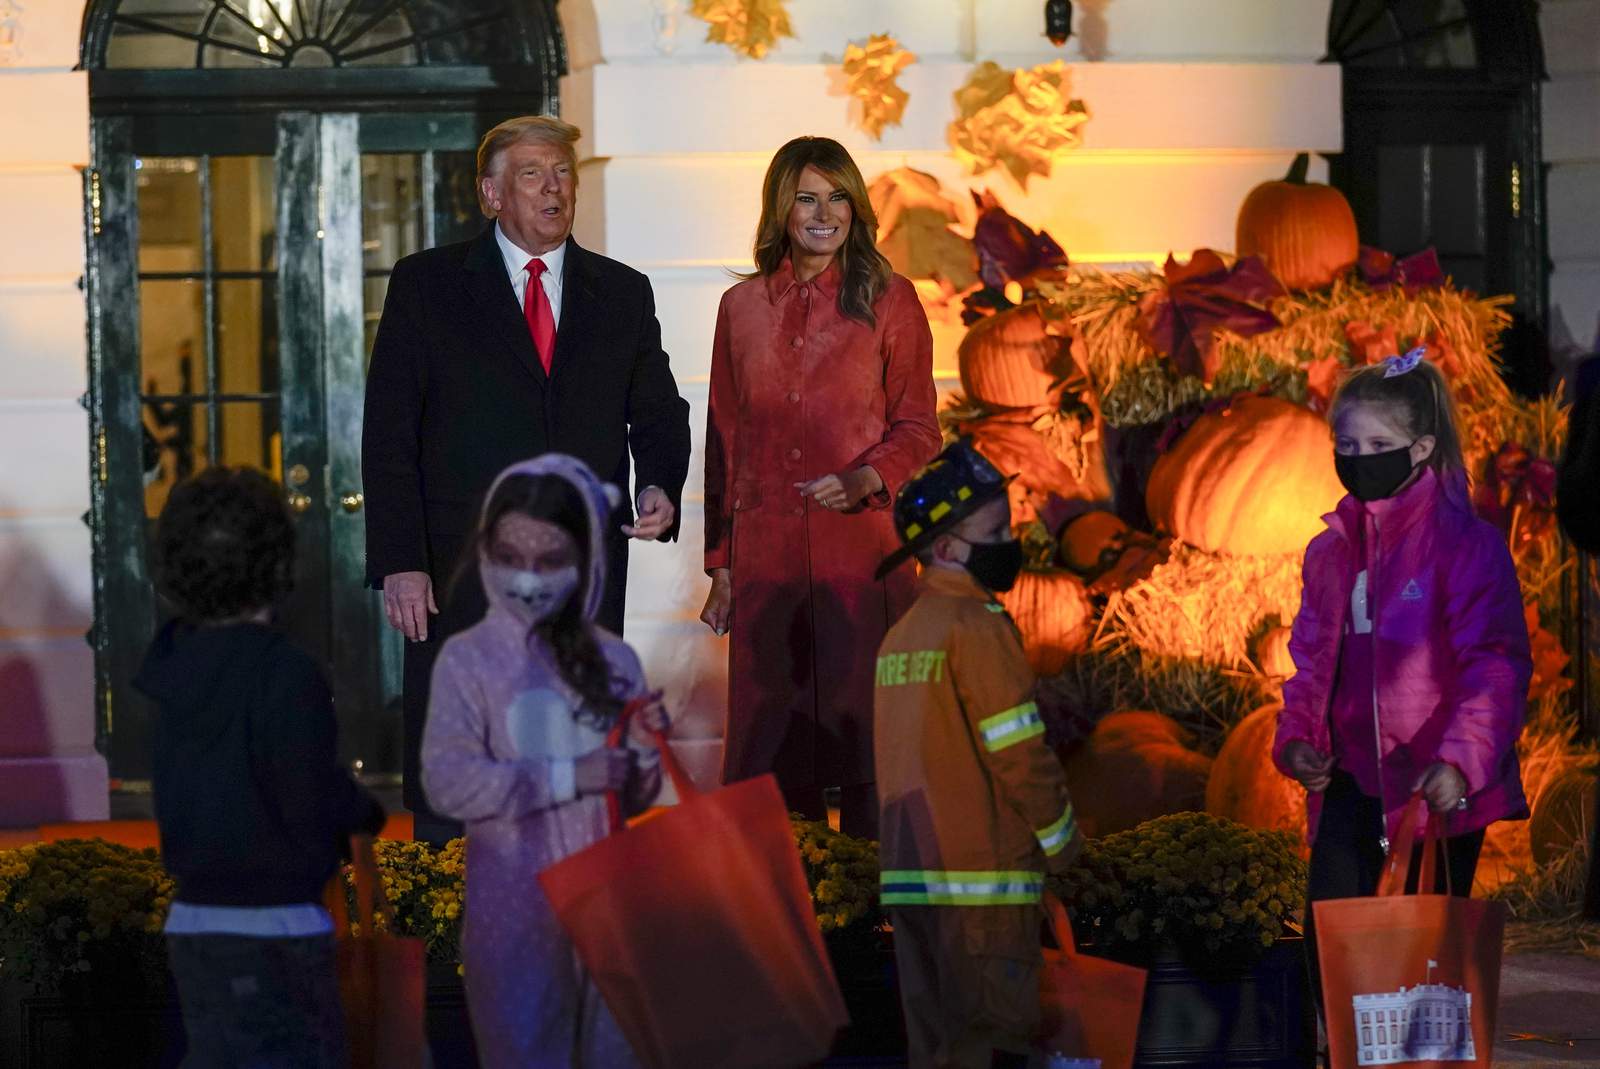 Halloween goes on at the White House with a few twists